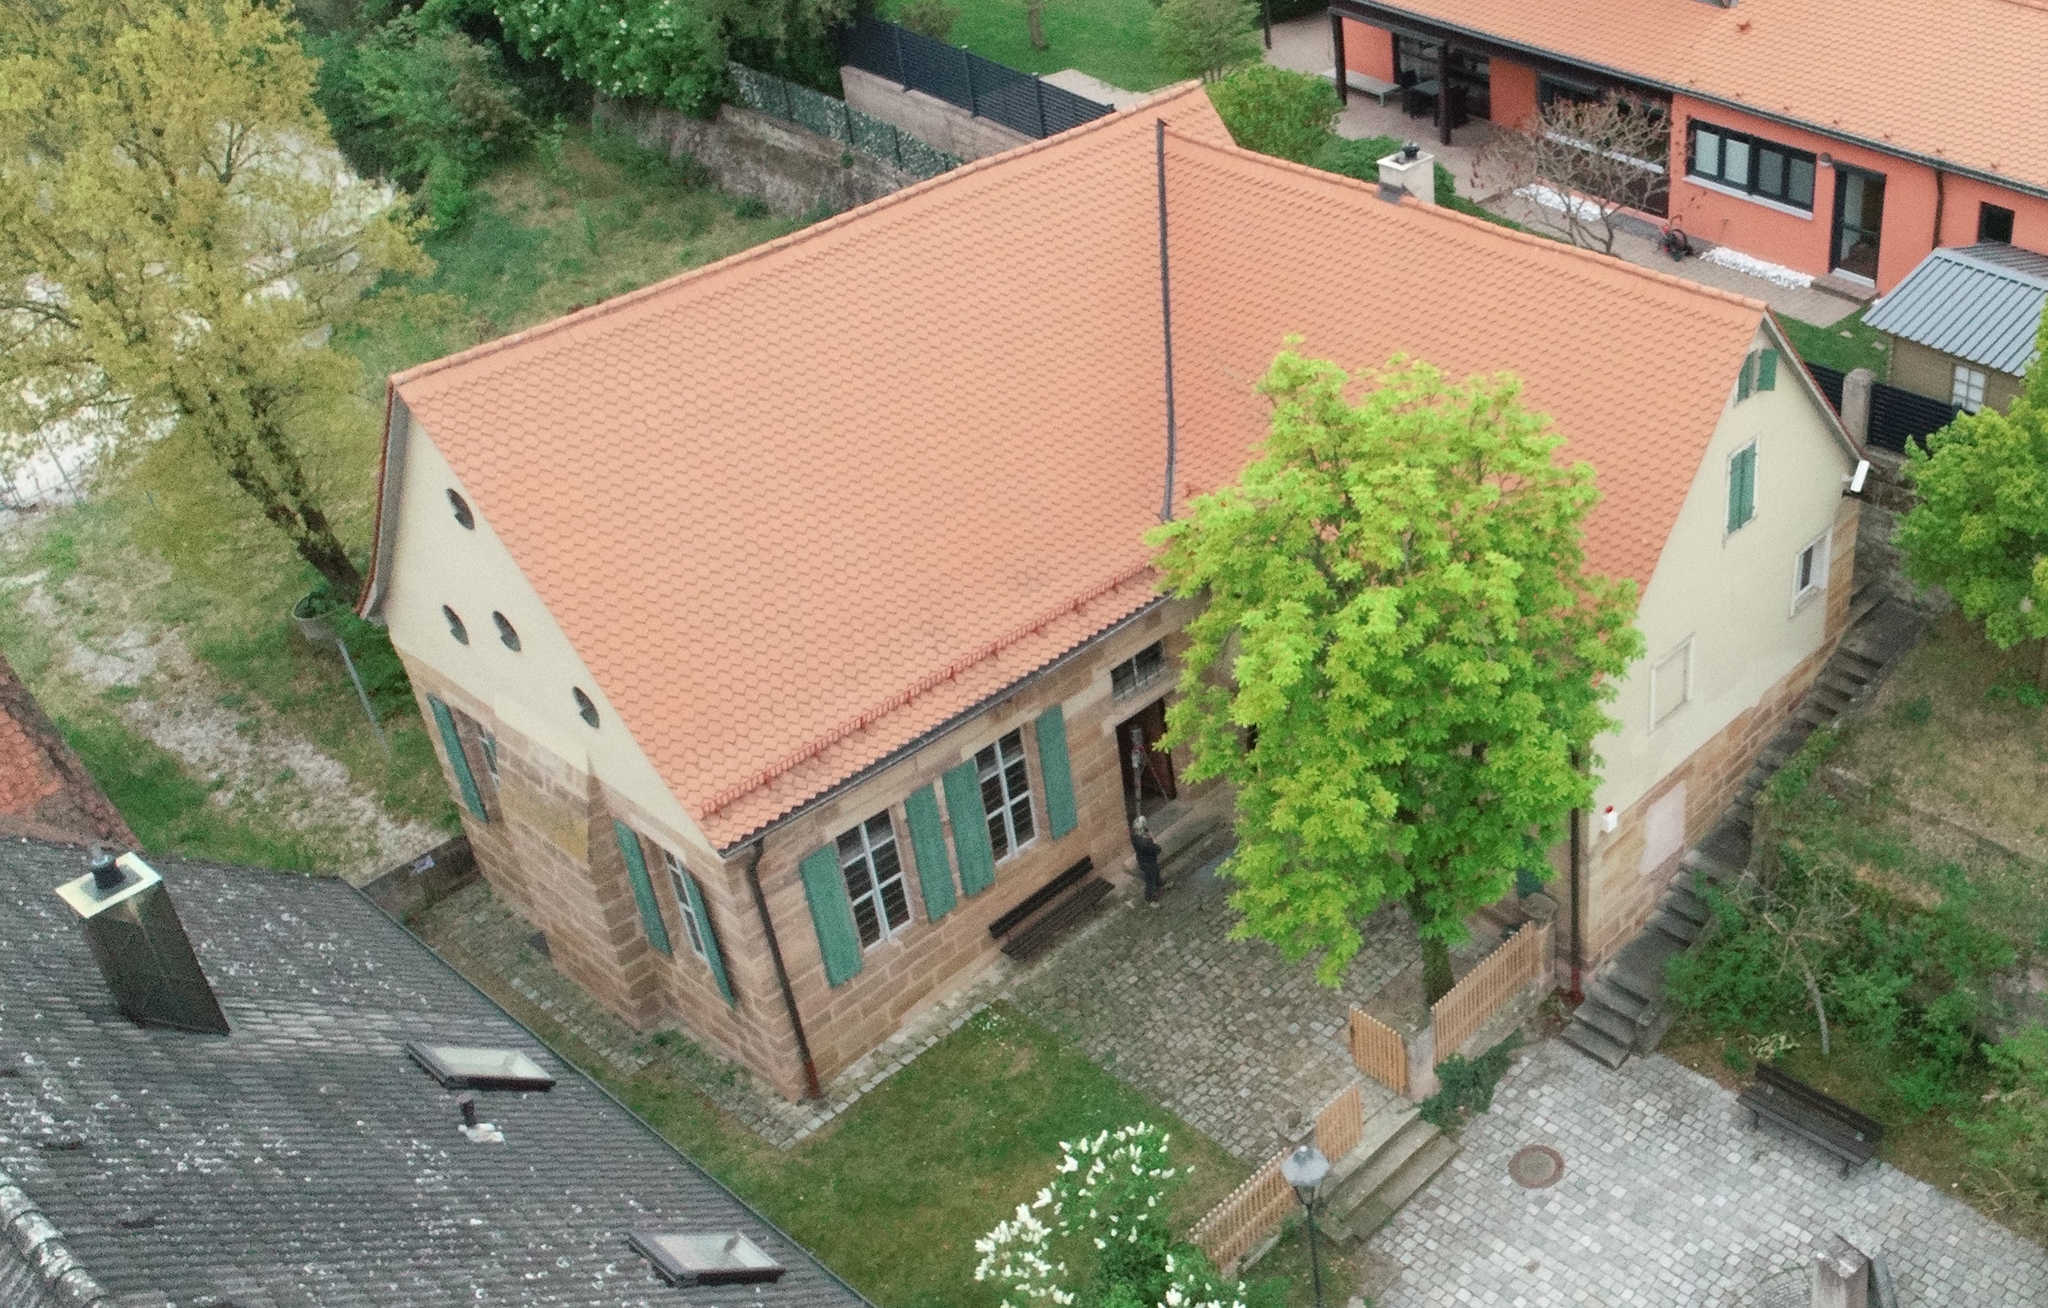 Building of the synagogue in Georgensgmünd